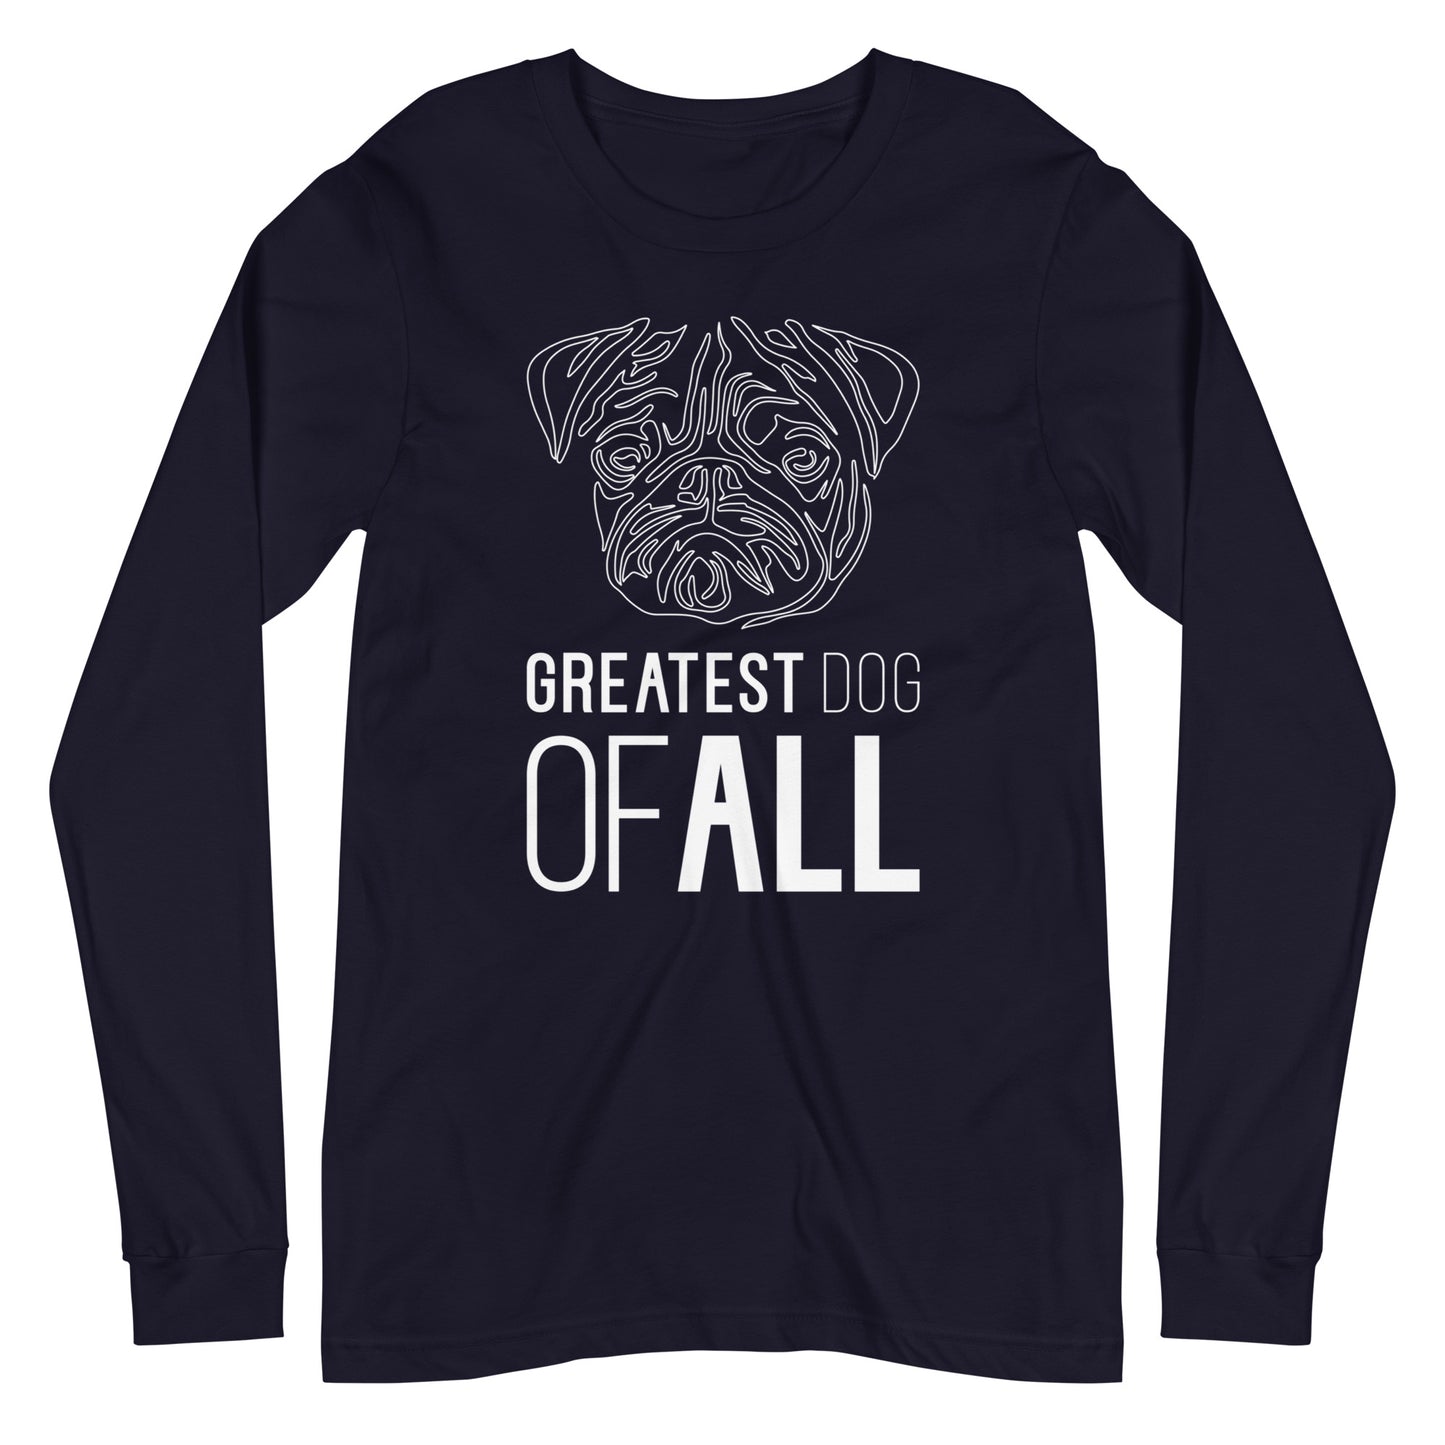 White line Pug face with Greatest Dog of All caption on unisex navy long sleeve t-shirt